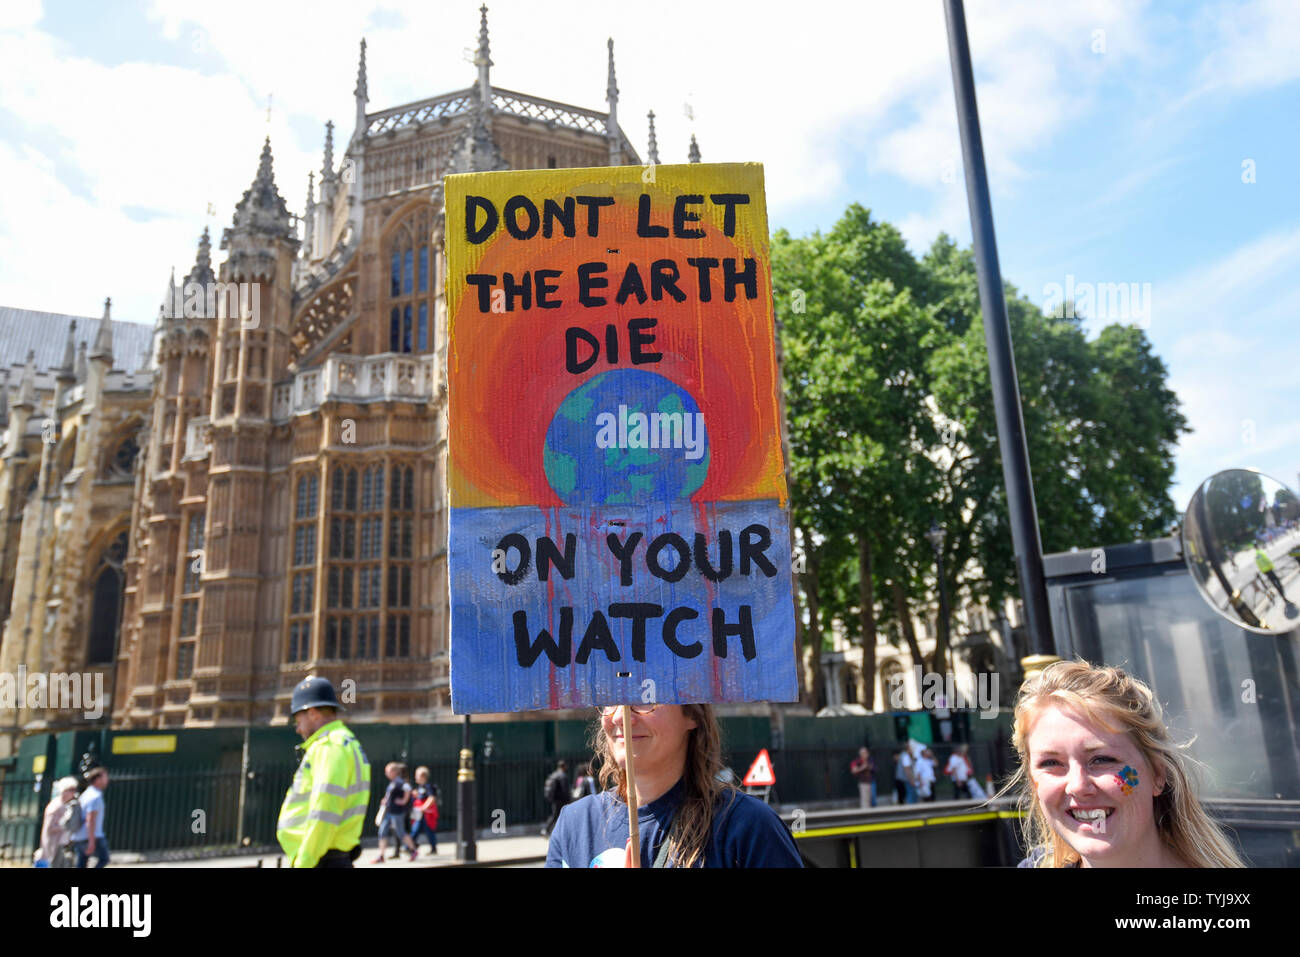 London, UK.  26 June 2019.   People take part in a 'Time Is Now' mass lobby around Parliament.  Activists are attempting to deliver a message to MPs that to tackle the environmental crisis, a strong Environment Bill is passed that can restore nature, cut plastic pollution and improve air quality.  Similar gatherings are taking place across the UK.  Credit: Stephen Chung / Alamy Live News Stock Photo